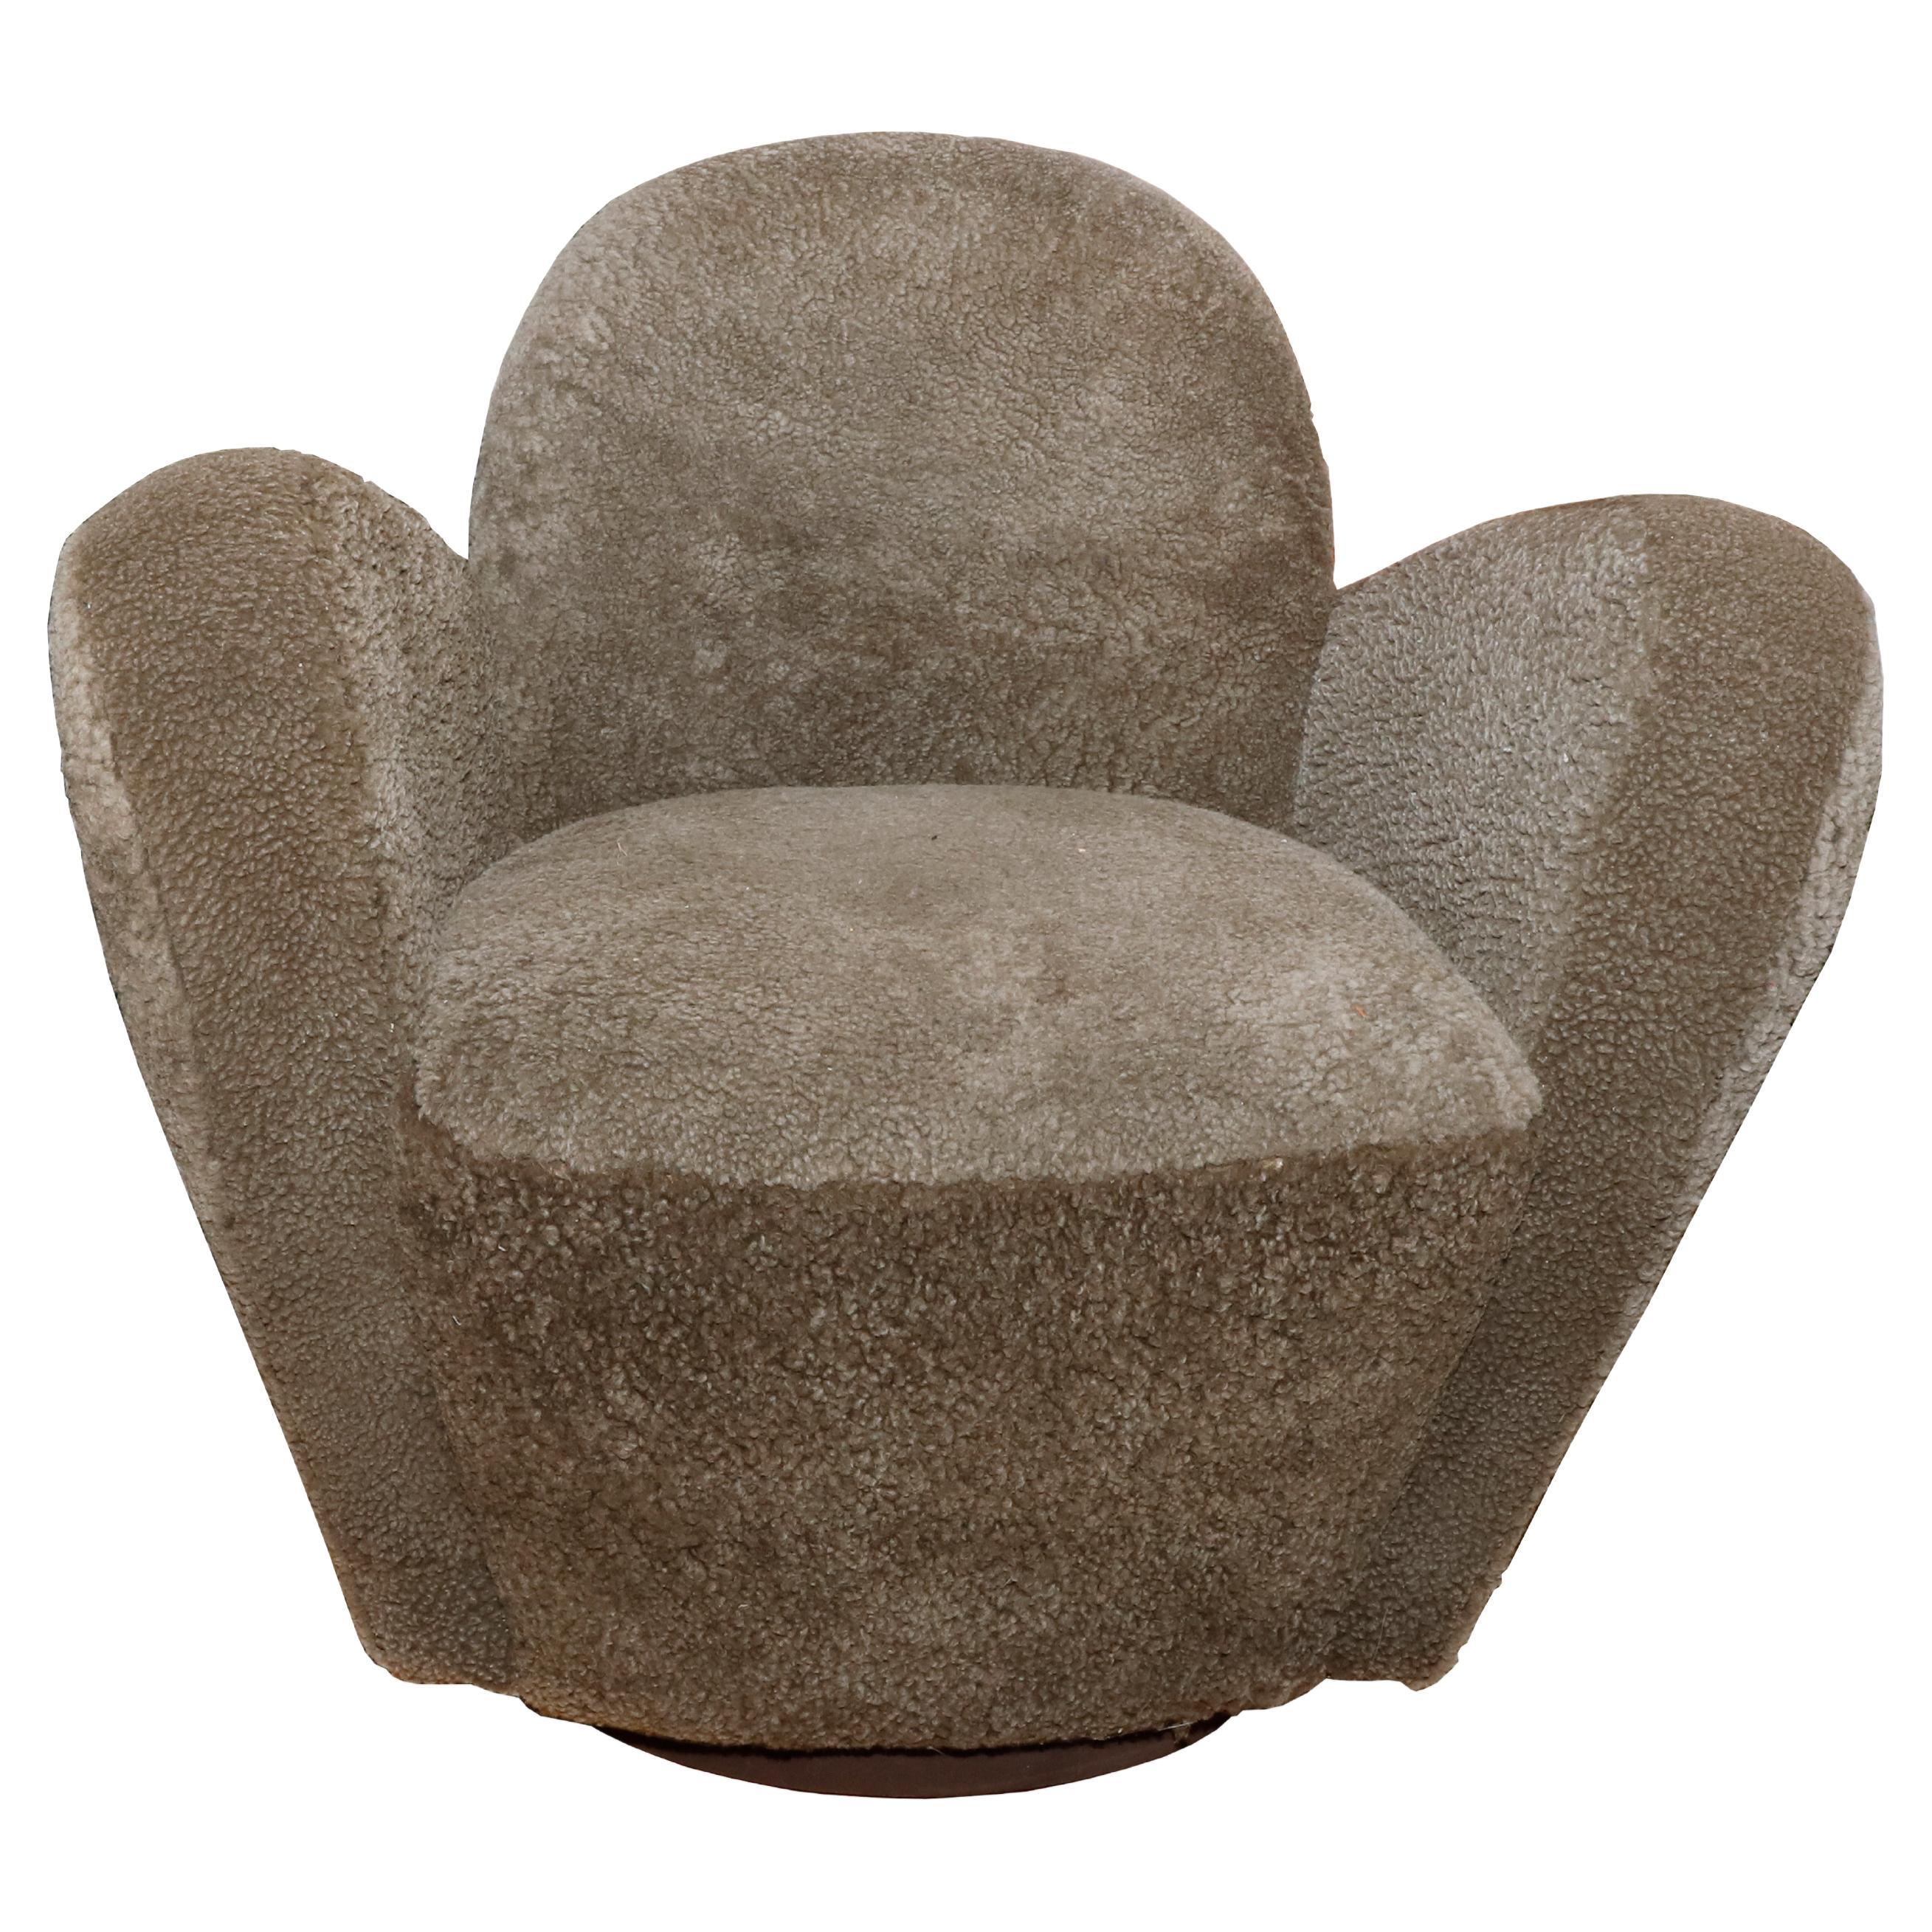 Pair of sheep skin swivel chairs by Michael Wolk titled 